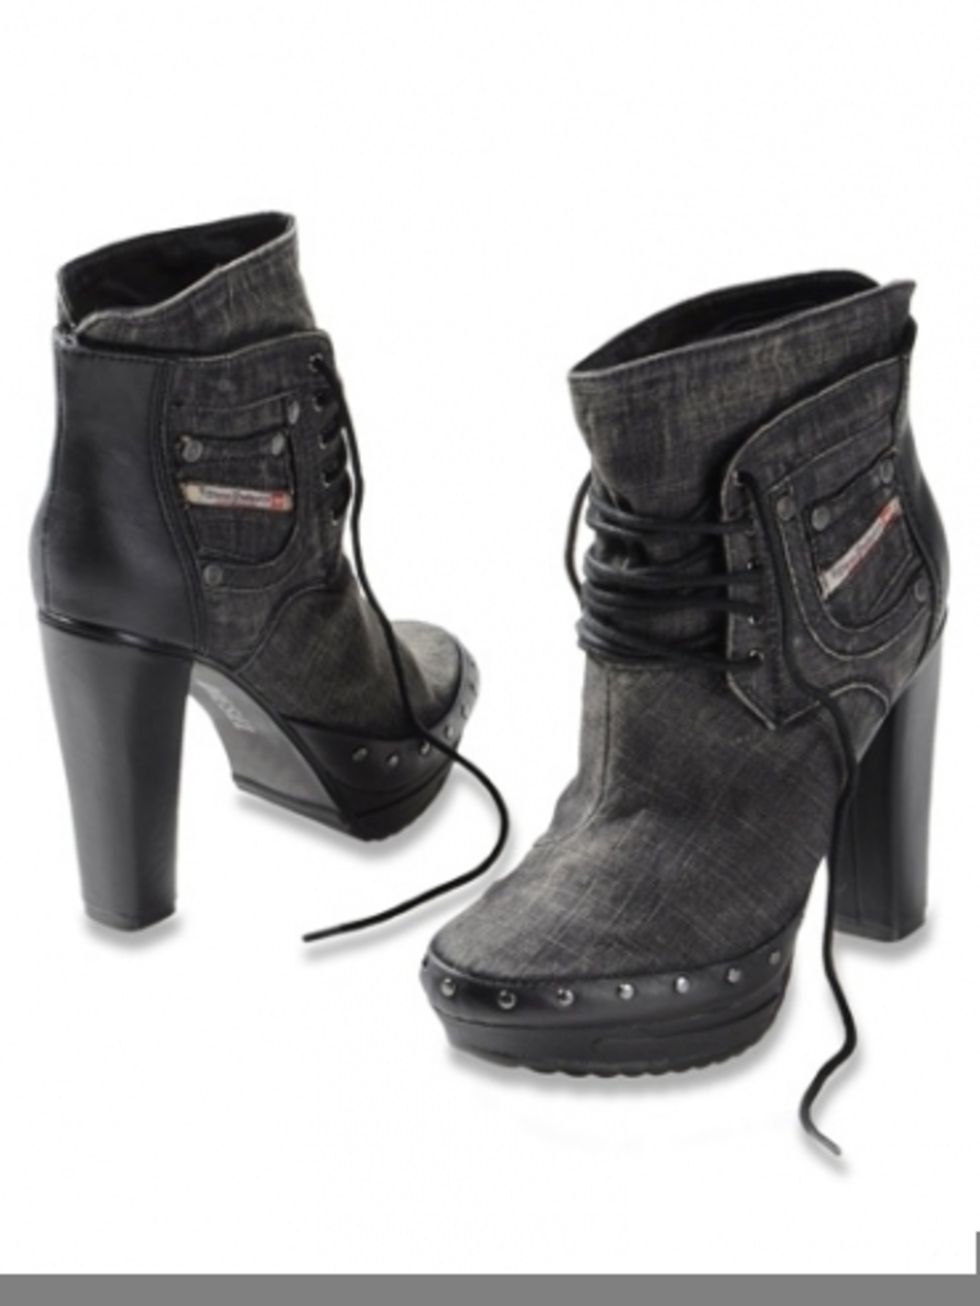 Footwear, Product, Brown, Shoe, Boot, Leather, Fashion, Black, Buckle, Fashion design, 